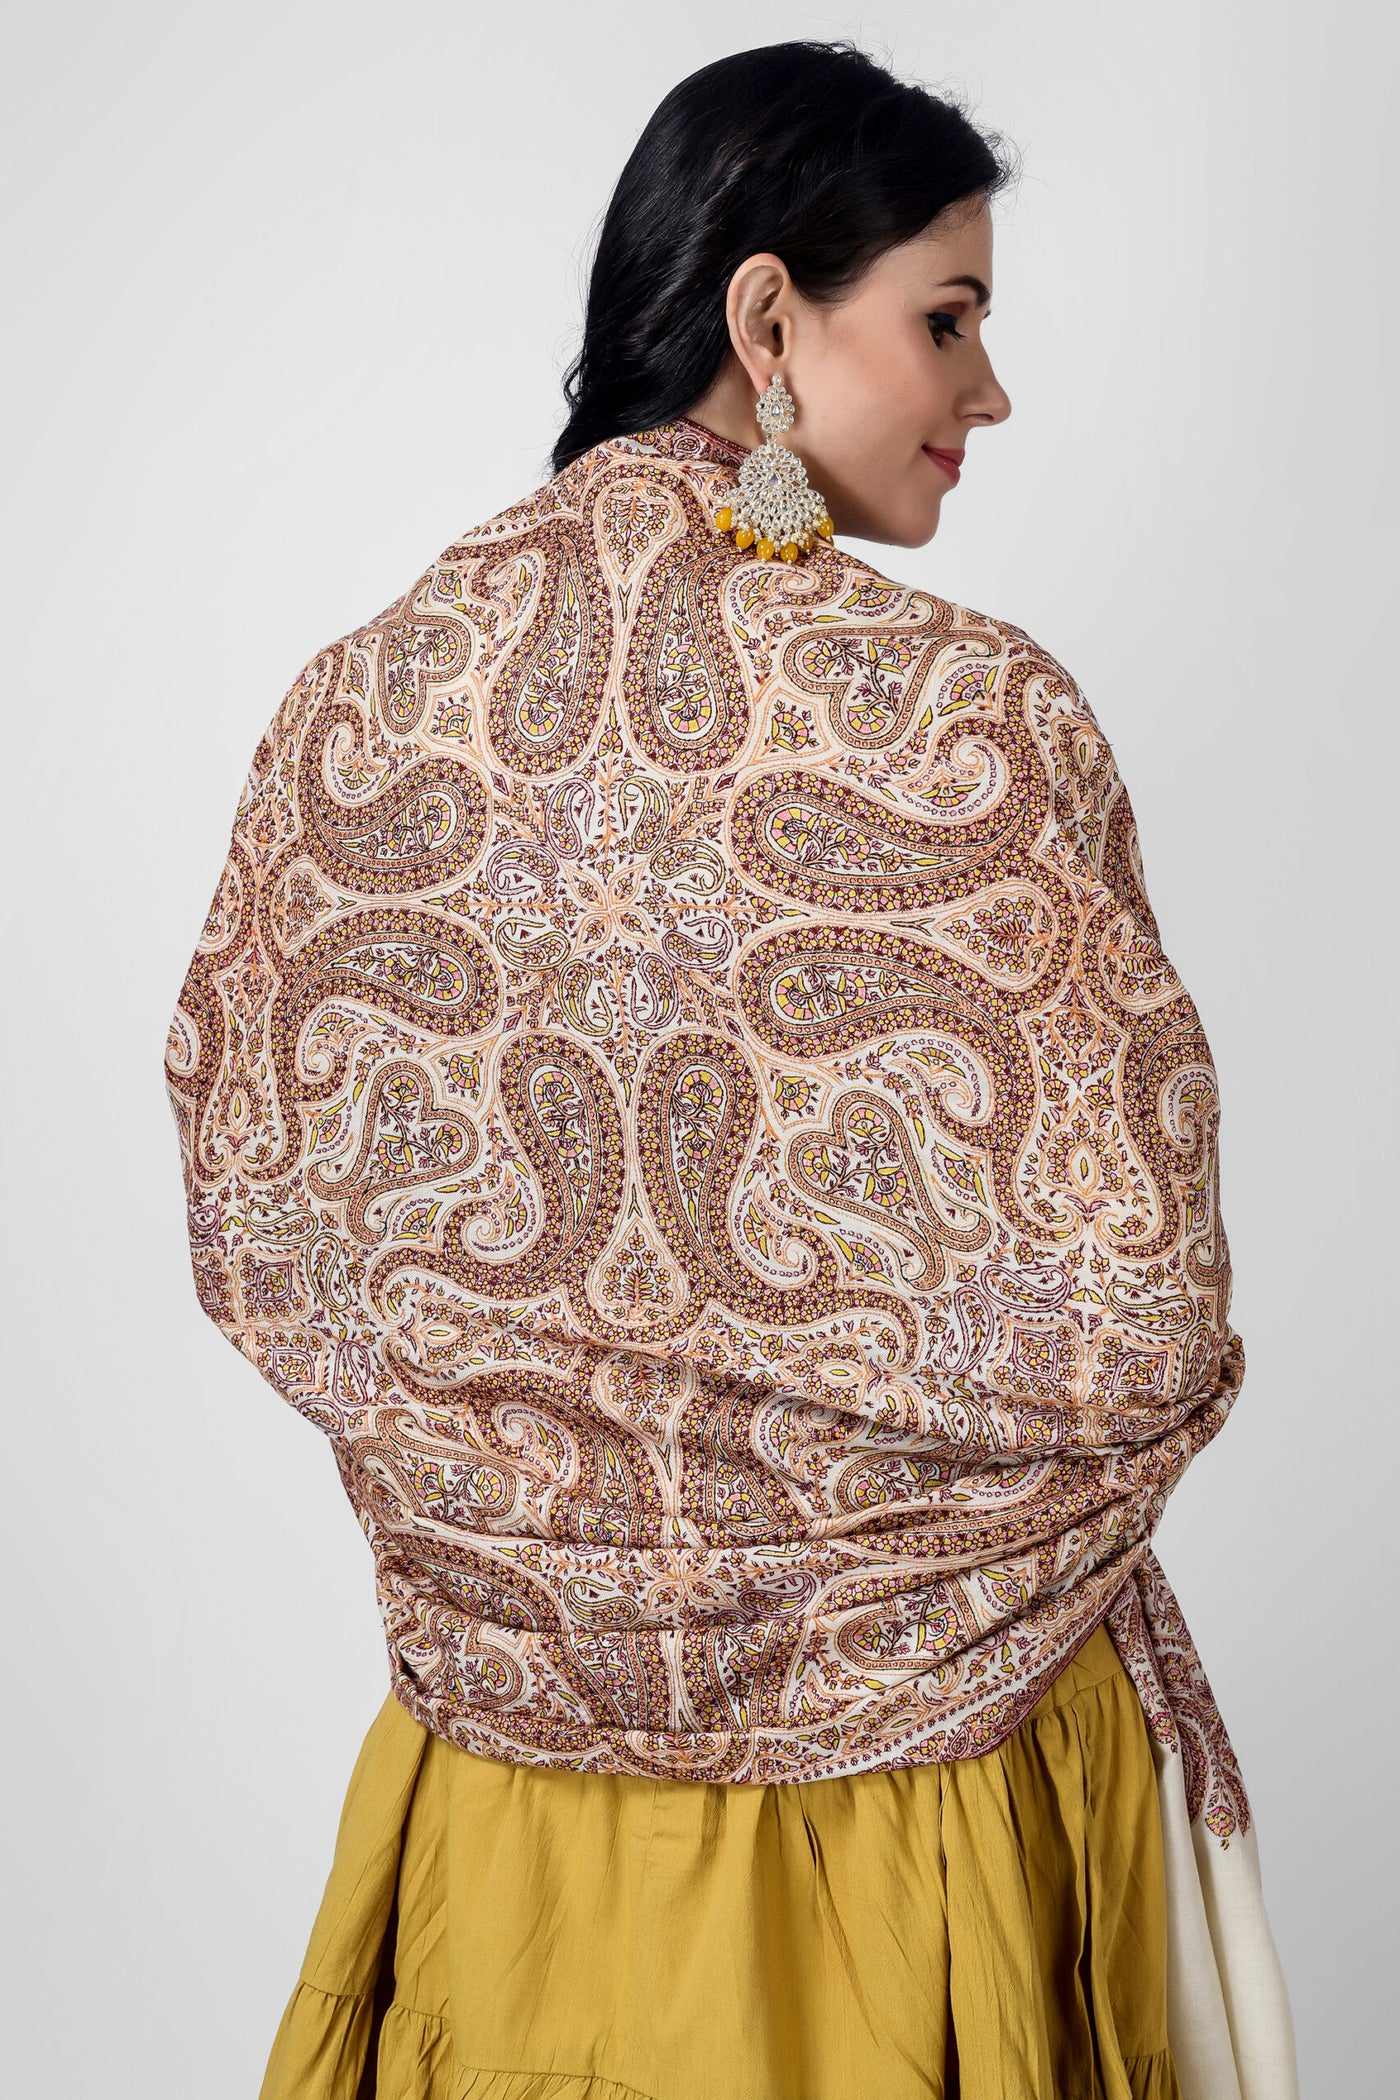  This beautiful white pashmina shawl is a unique piece of art, featuring intricate embroidery with a timeless khatmband design. Perfect for formal or casual settings .